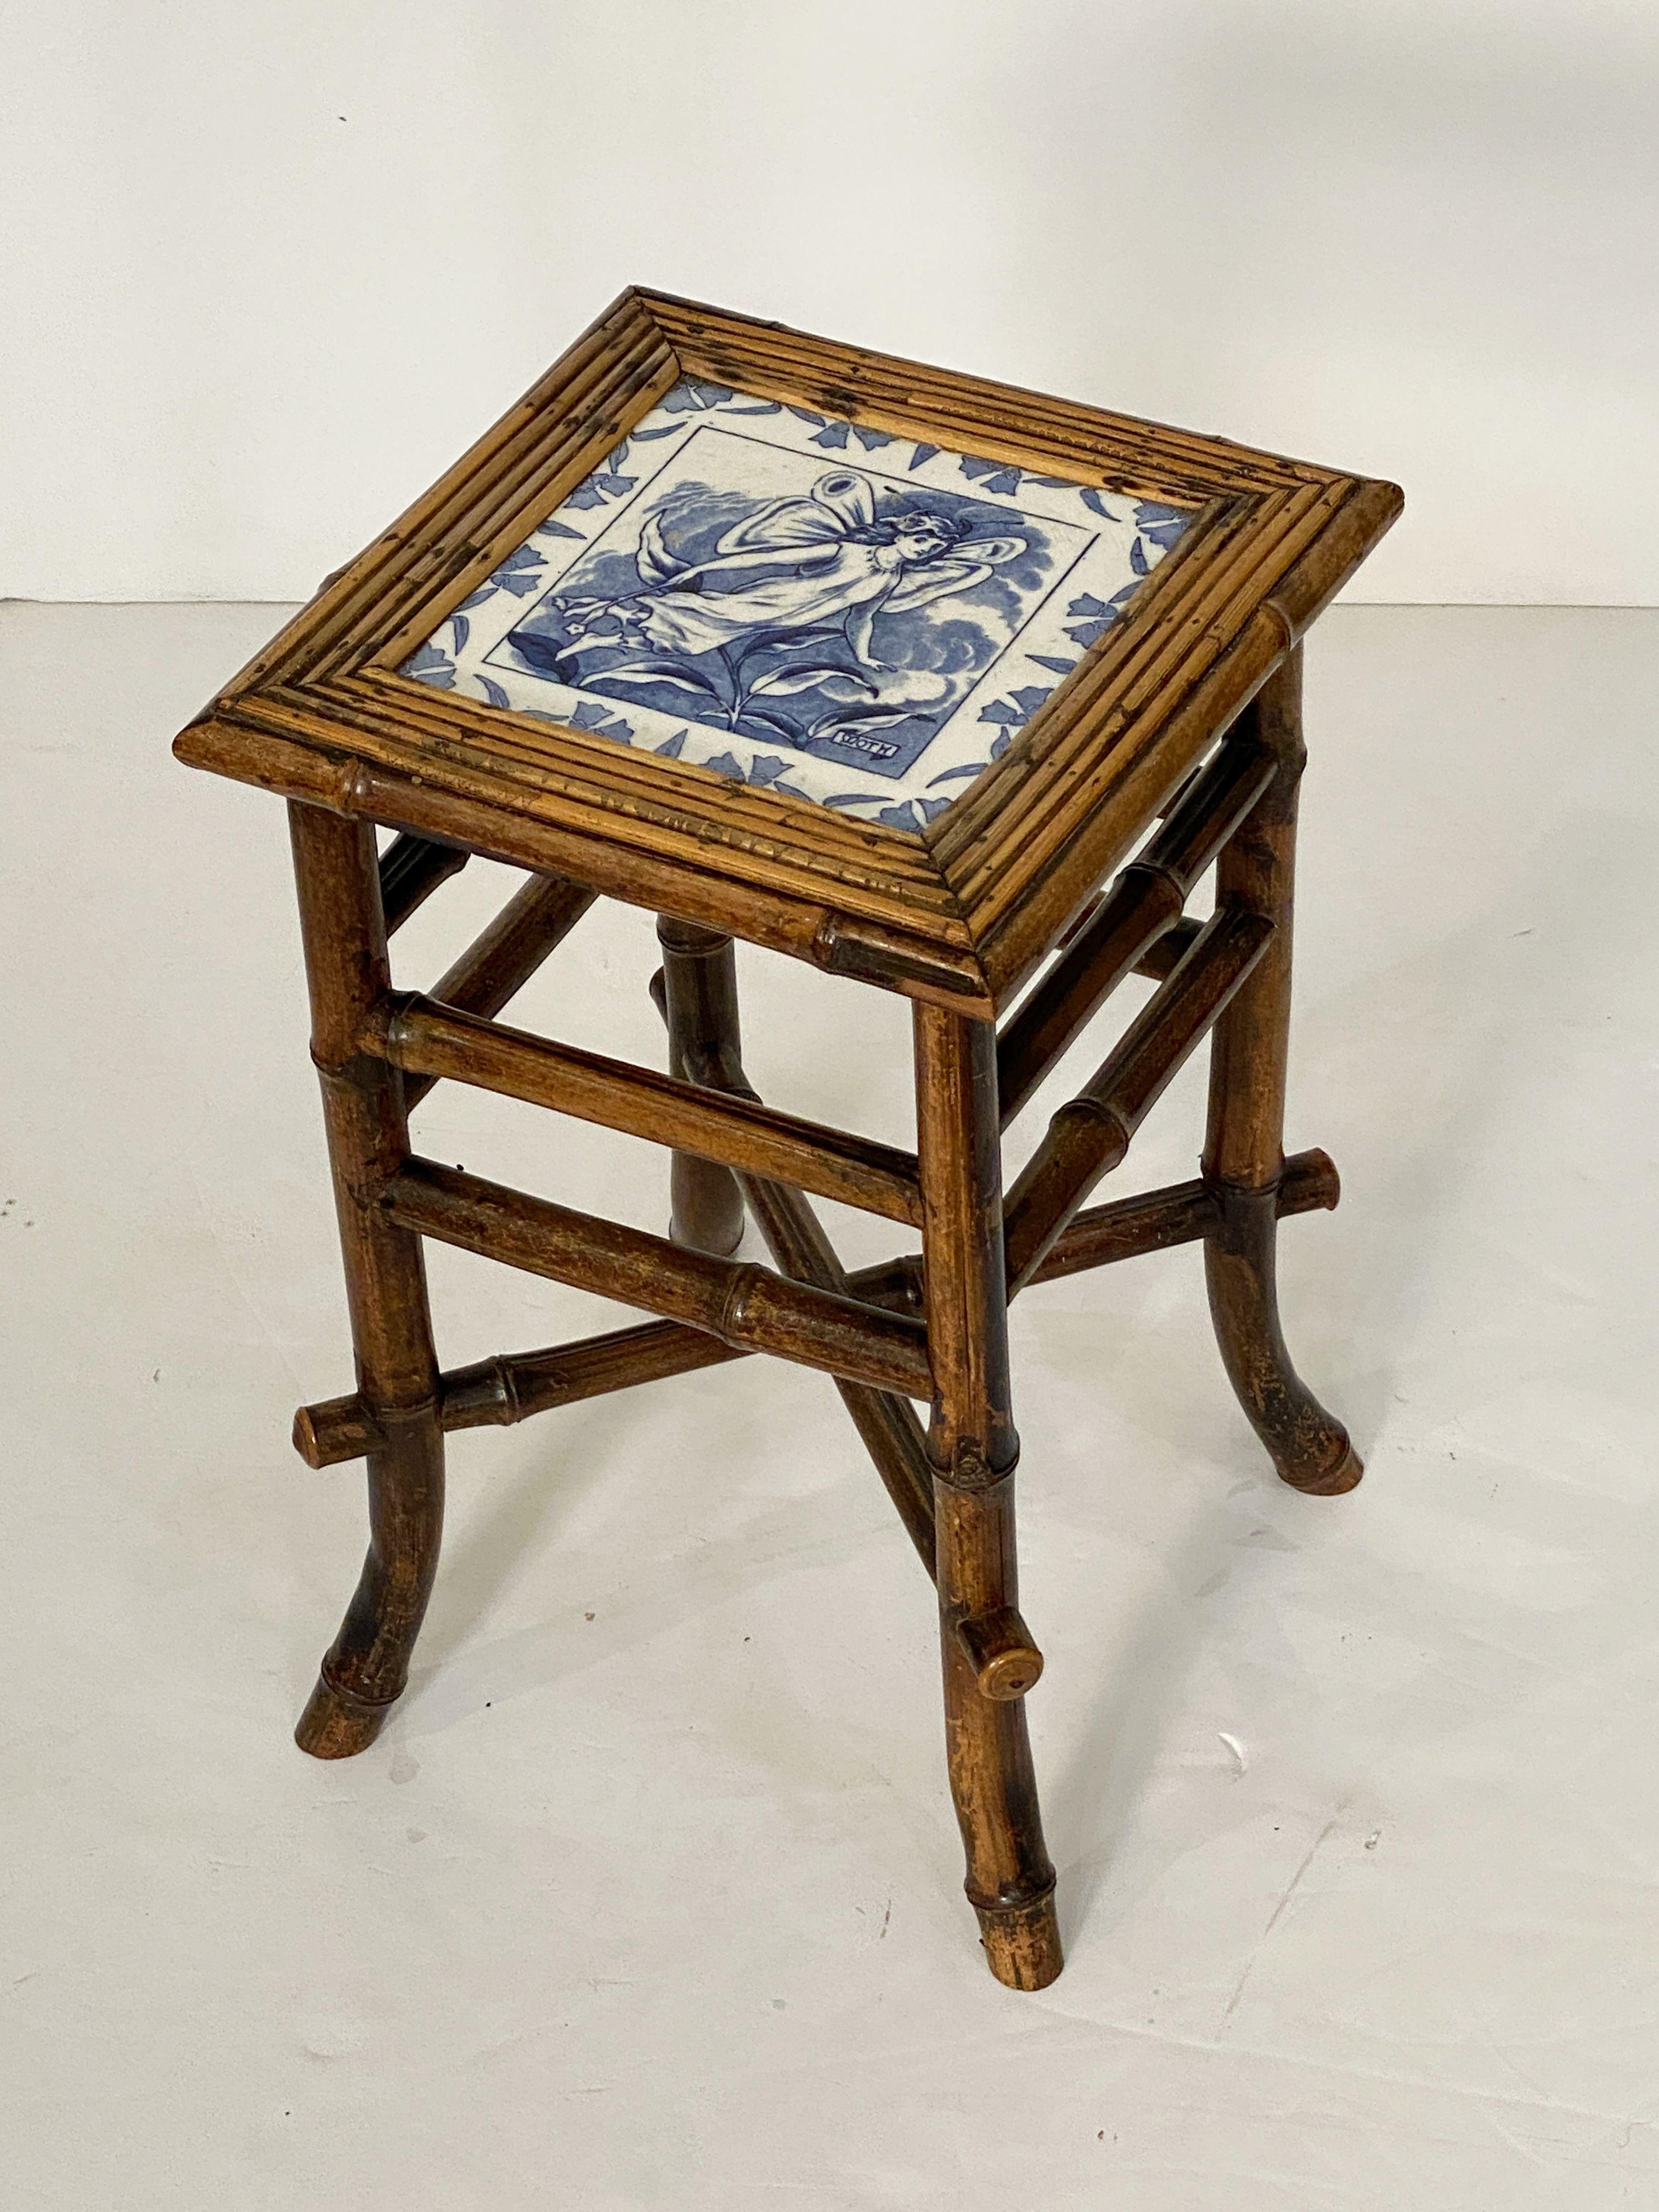 English Bamboo Table or Stool with Tile Seat from the Aesthetic Movement Era For Sale 4